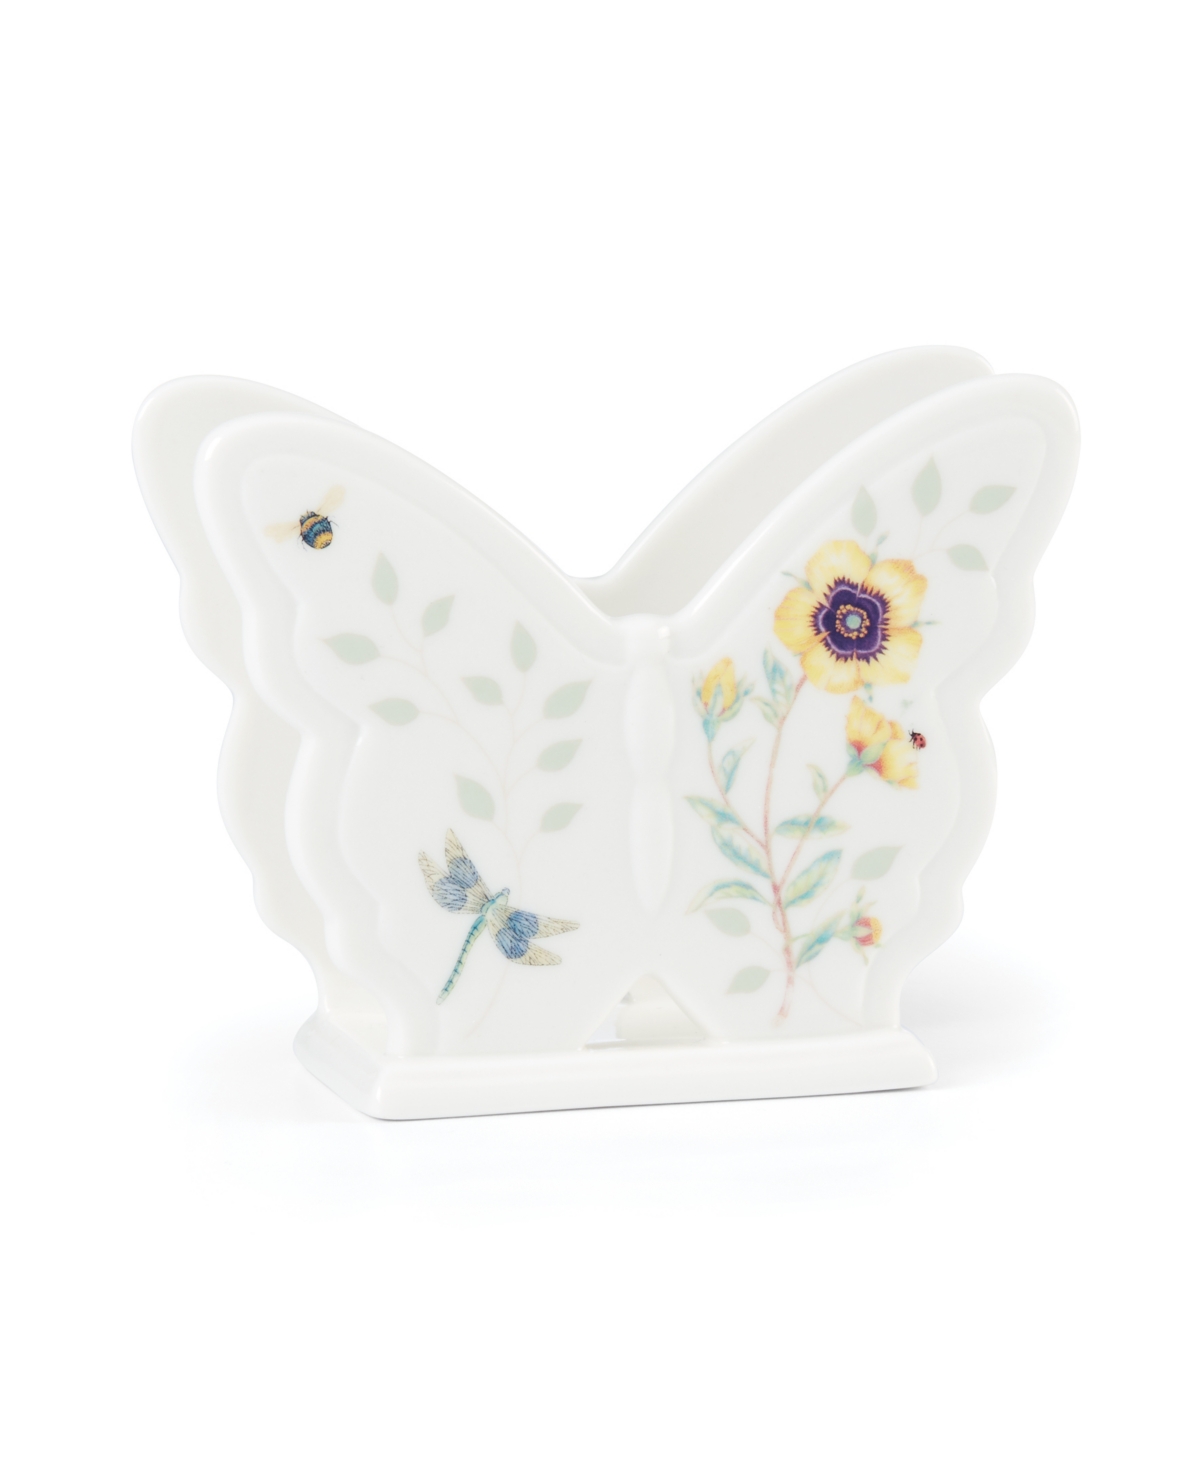 Butterfly Meadow Kitchen Sponge Holder, Created for Macy's - White With Multi-color Botanical Design